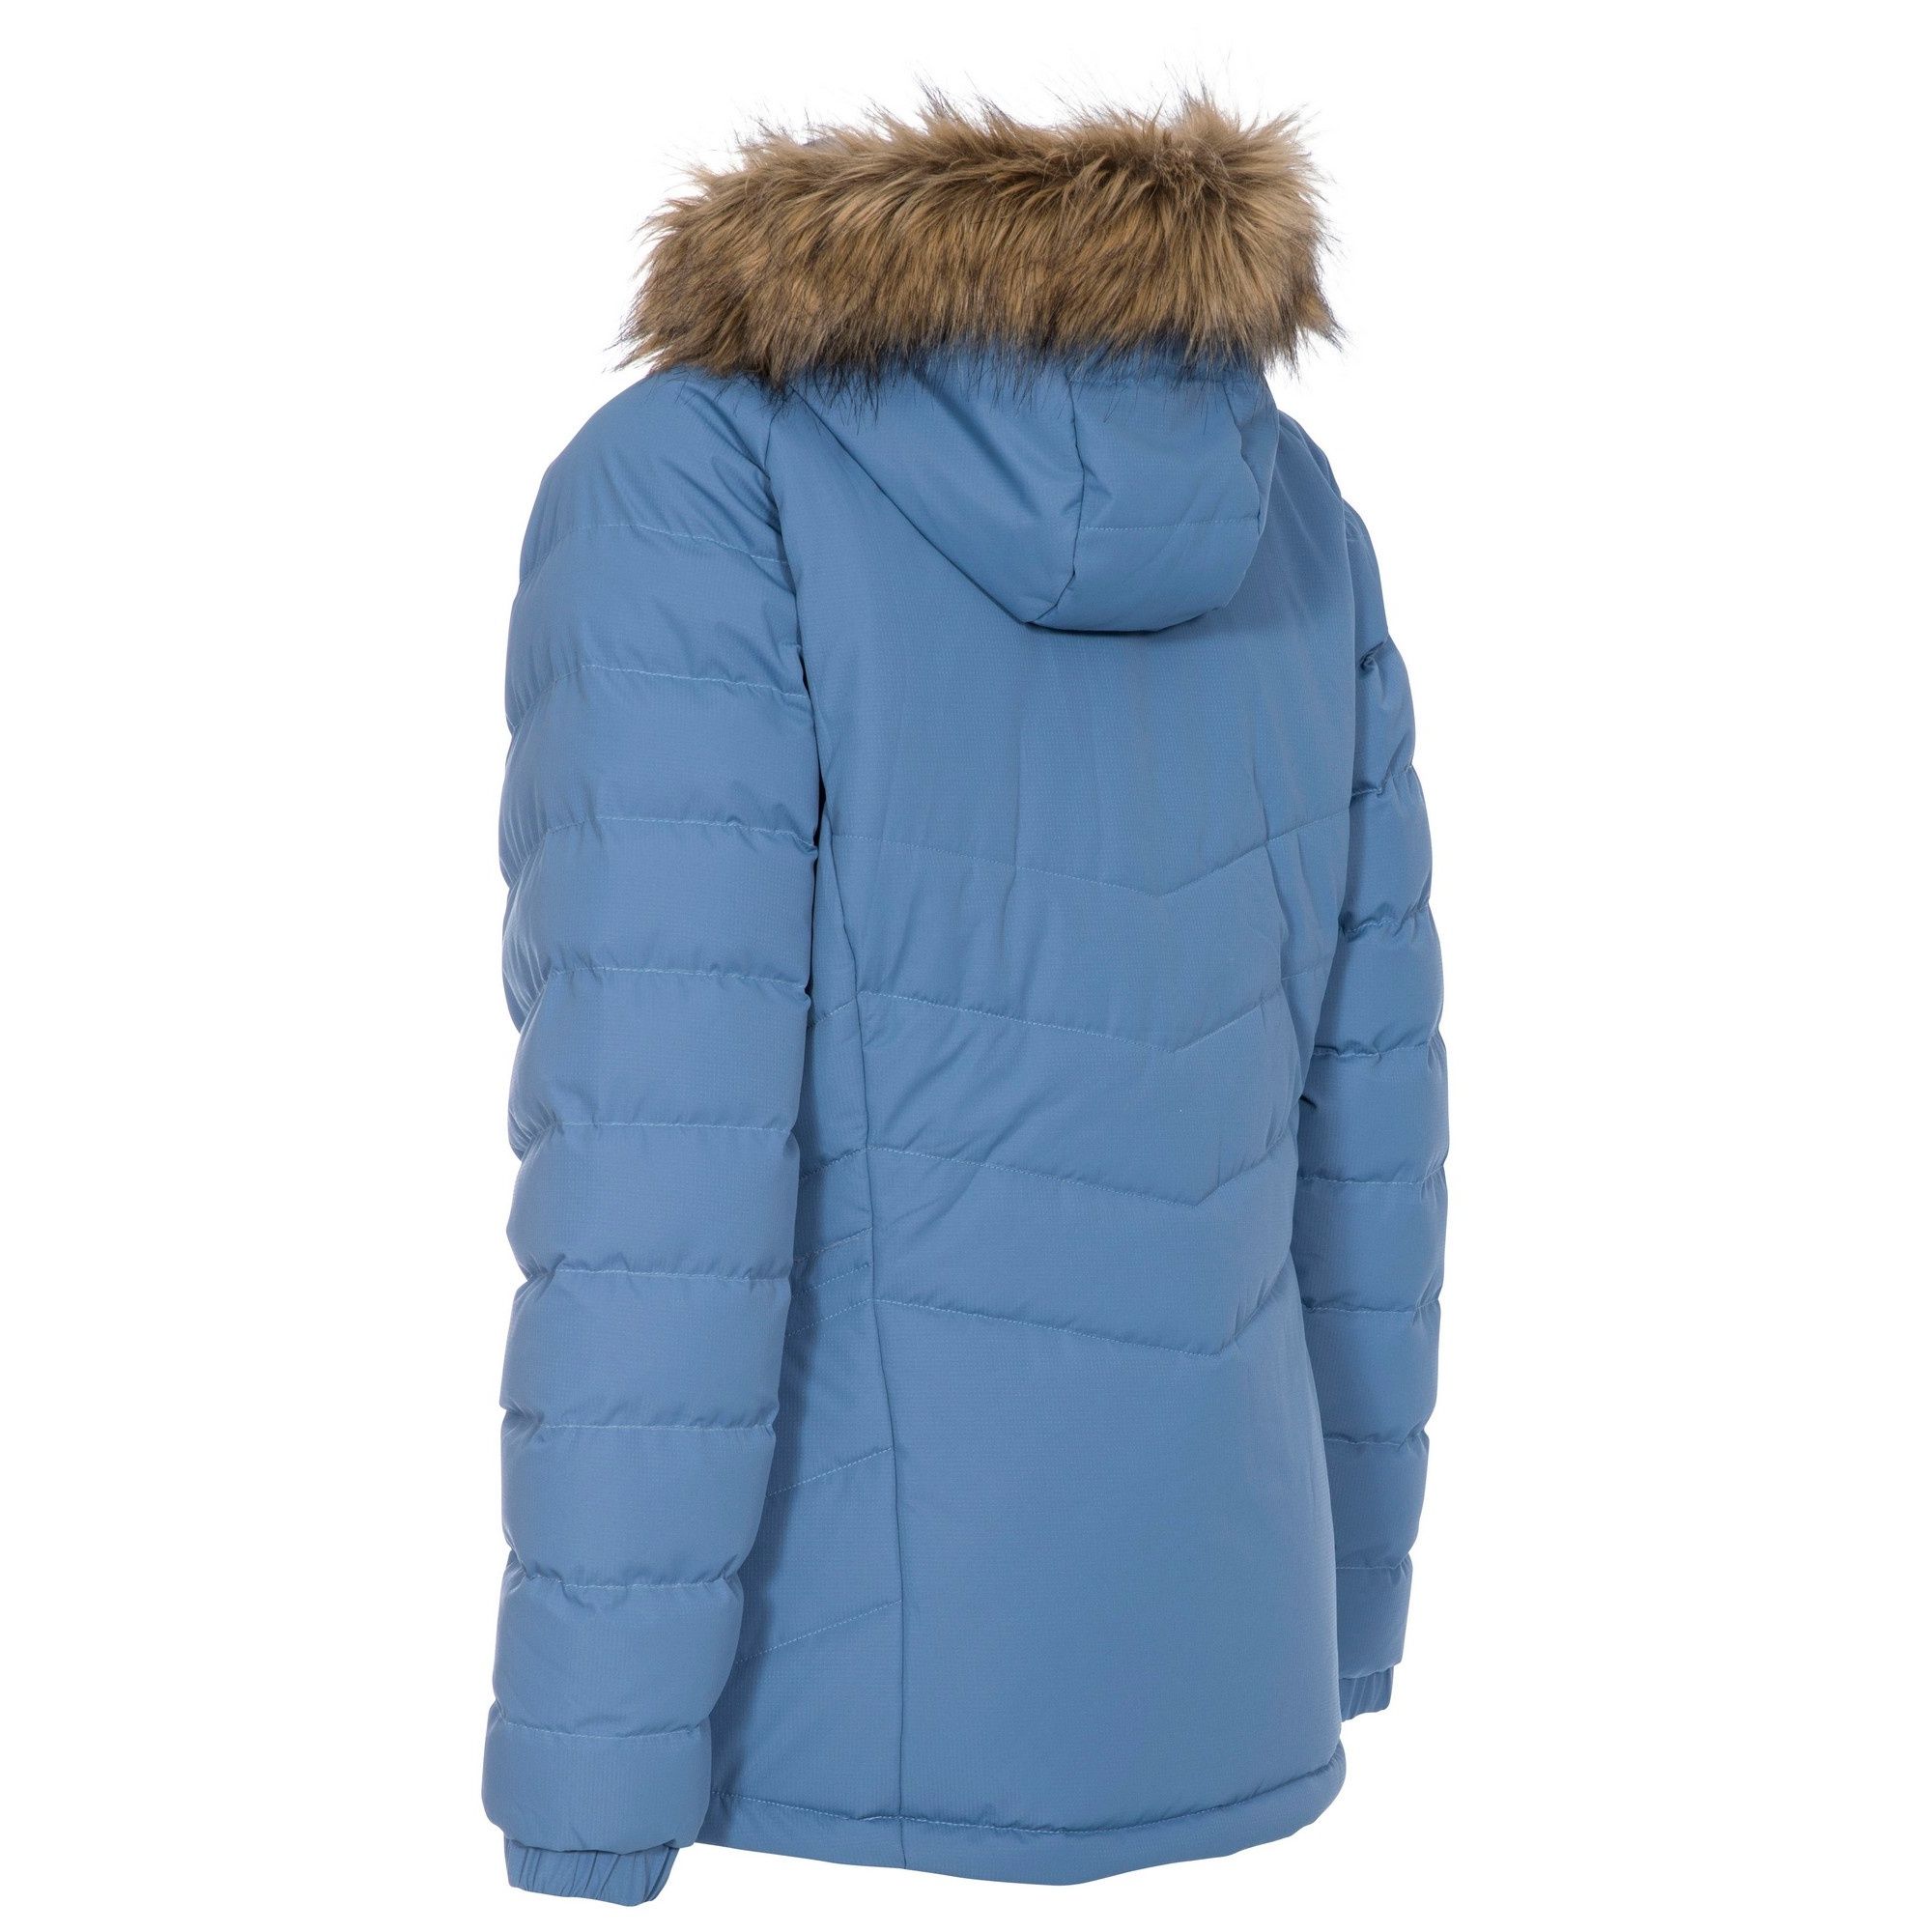 Padded. Contrast lining and CF zip. Adjustable zip off hood with fur trim. Elasticated cuff. 2 concealed zip pockets. Inner storm flap. Drawcord hem. Waterproof 2000mm, windproof. Shell: 100% Polyester, TPU membrane, Lining: 100% Polyester, Filling: 100% Polyester. Trespass Womens Chest Sizing (approx): XS/8 - 32in/81cm, S/10 - 34in/86cm, M/12 - 36in/91.4cm, L/14 - 38in/96.5cm, XL/16 - 40in/101.5cm, XXL/18 - 42in/106.5cm.